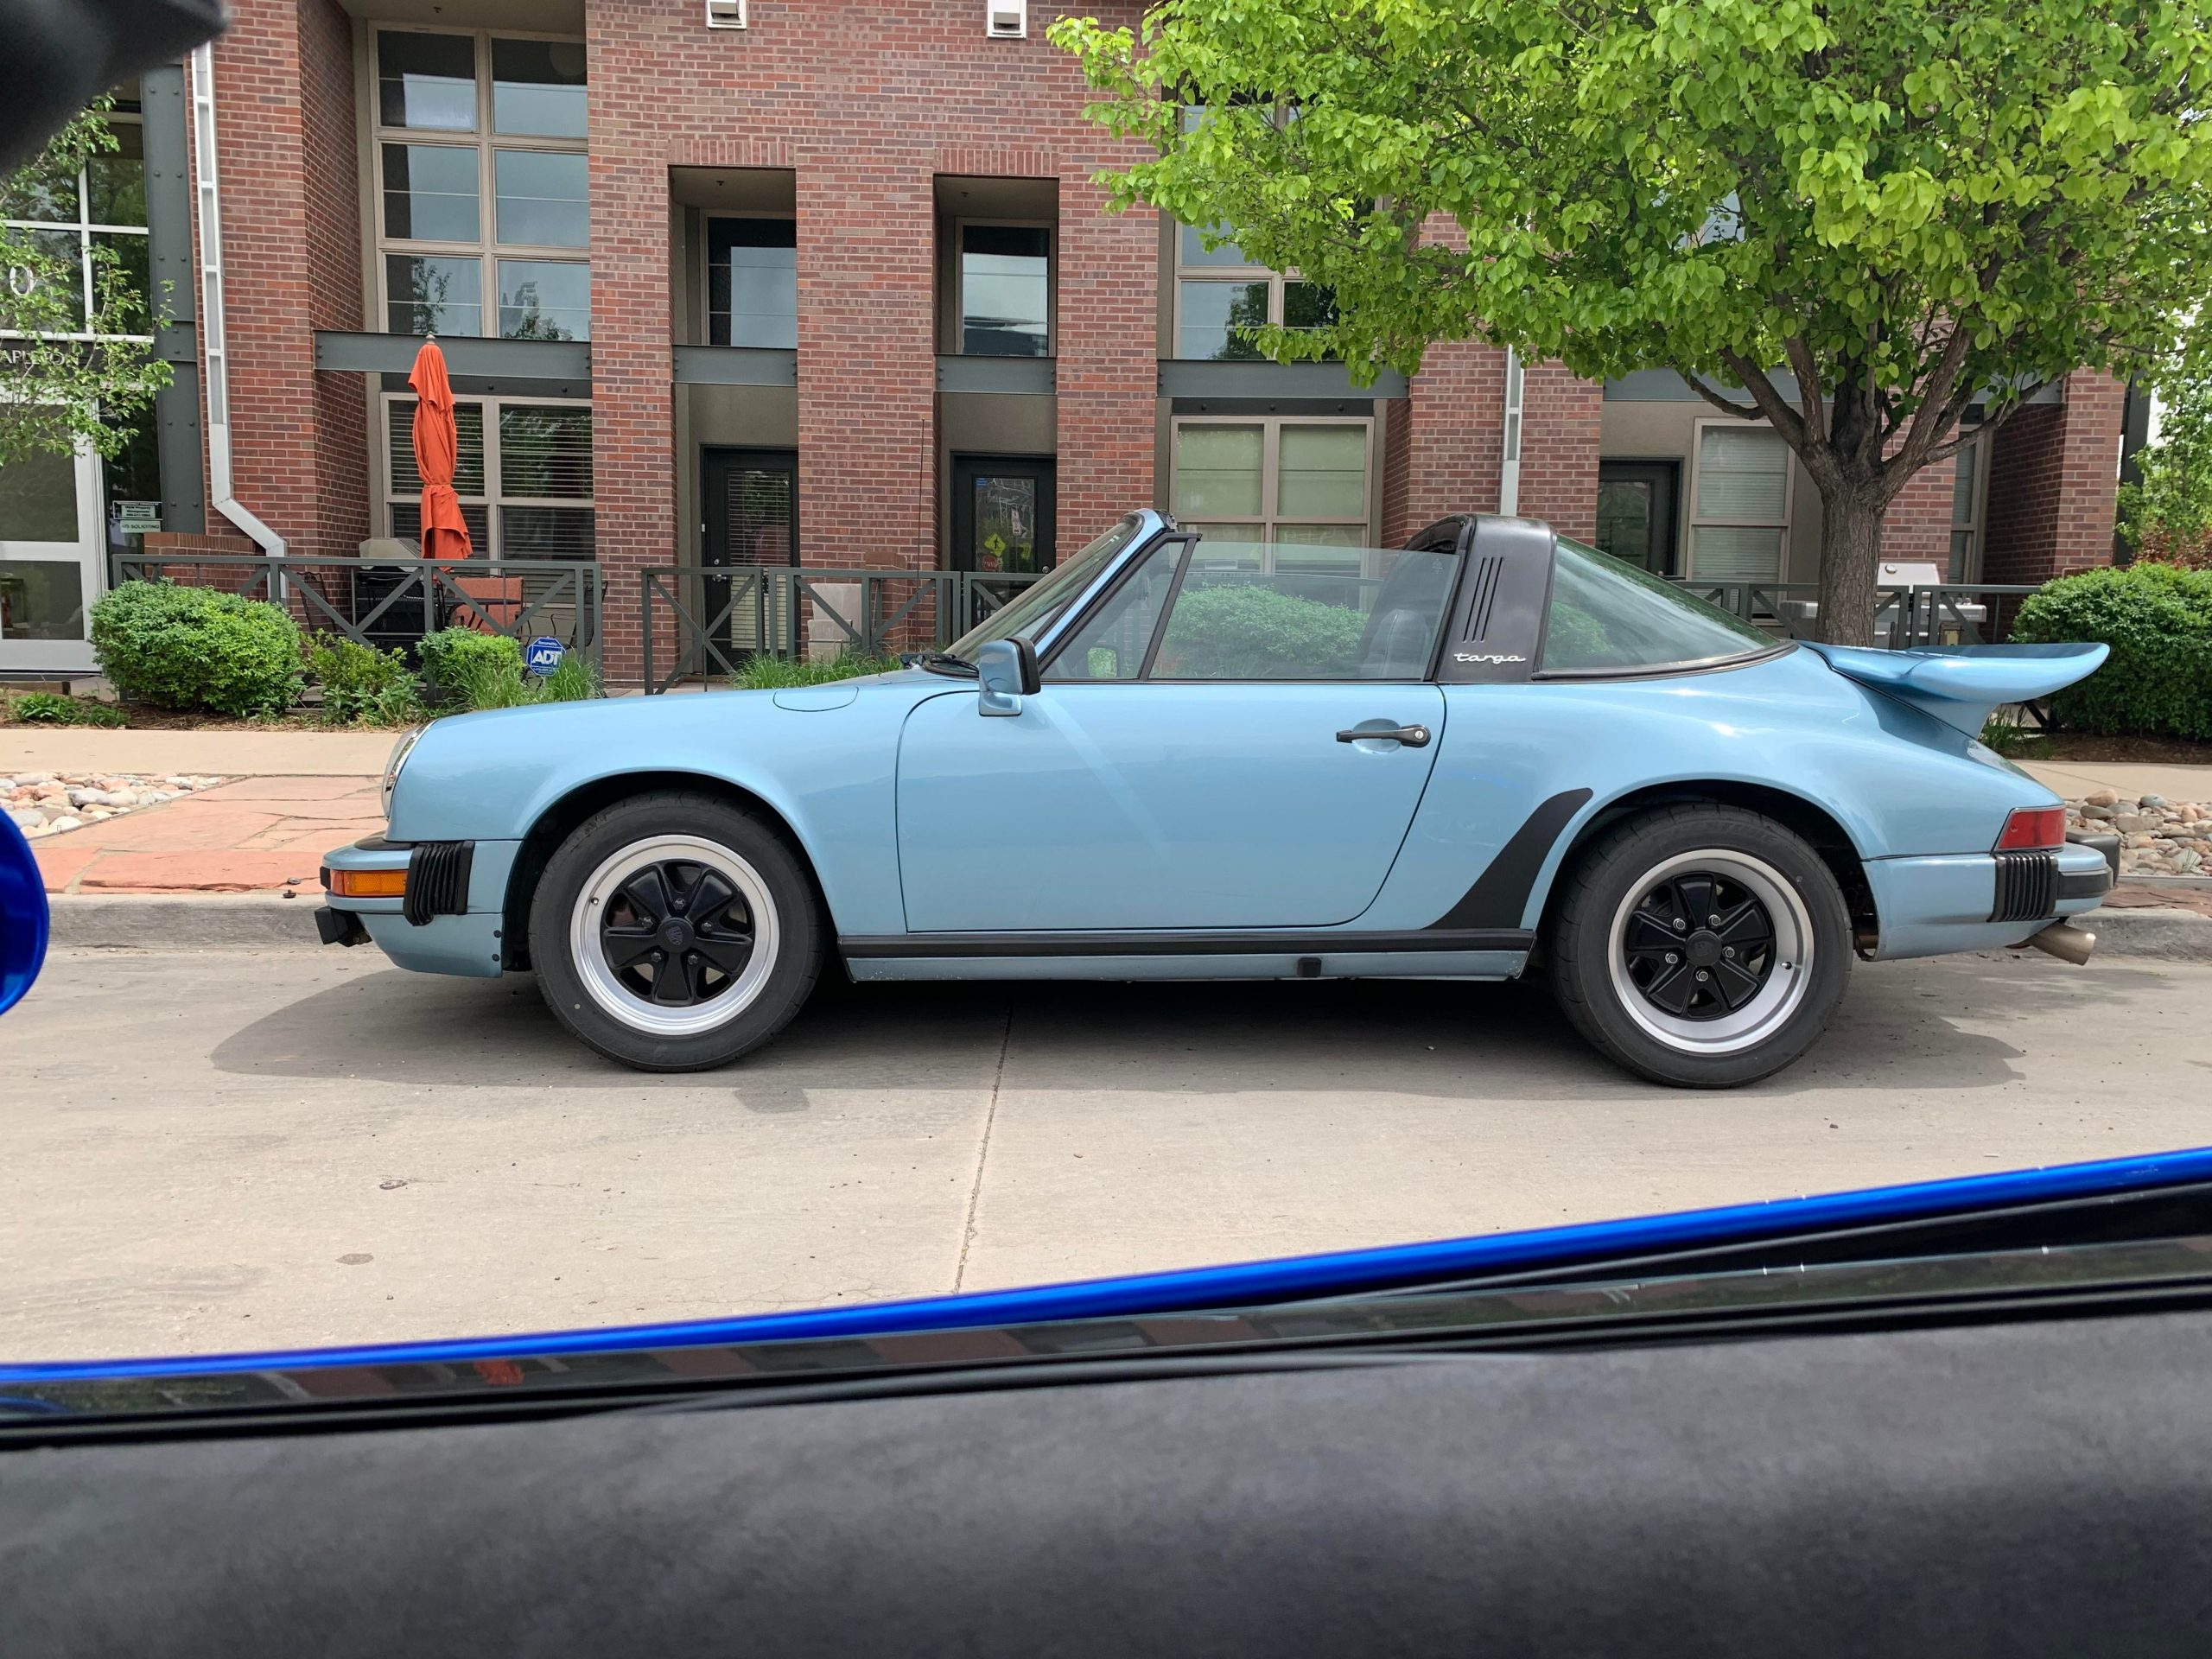 Air cooled, whale tail, targa. Beauty.